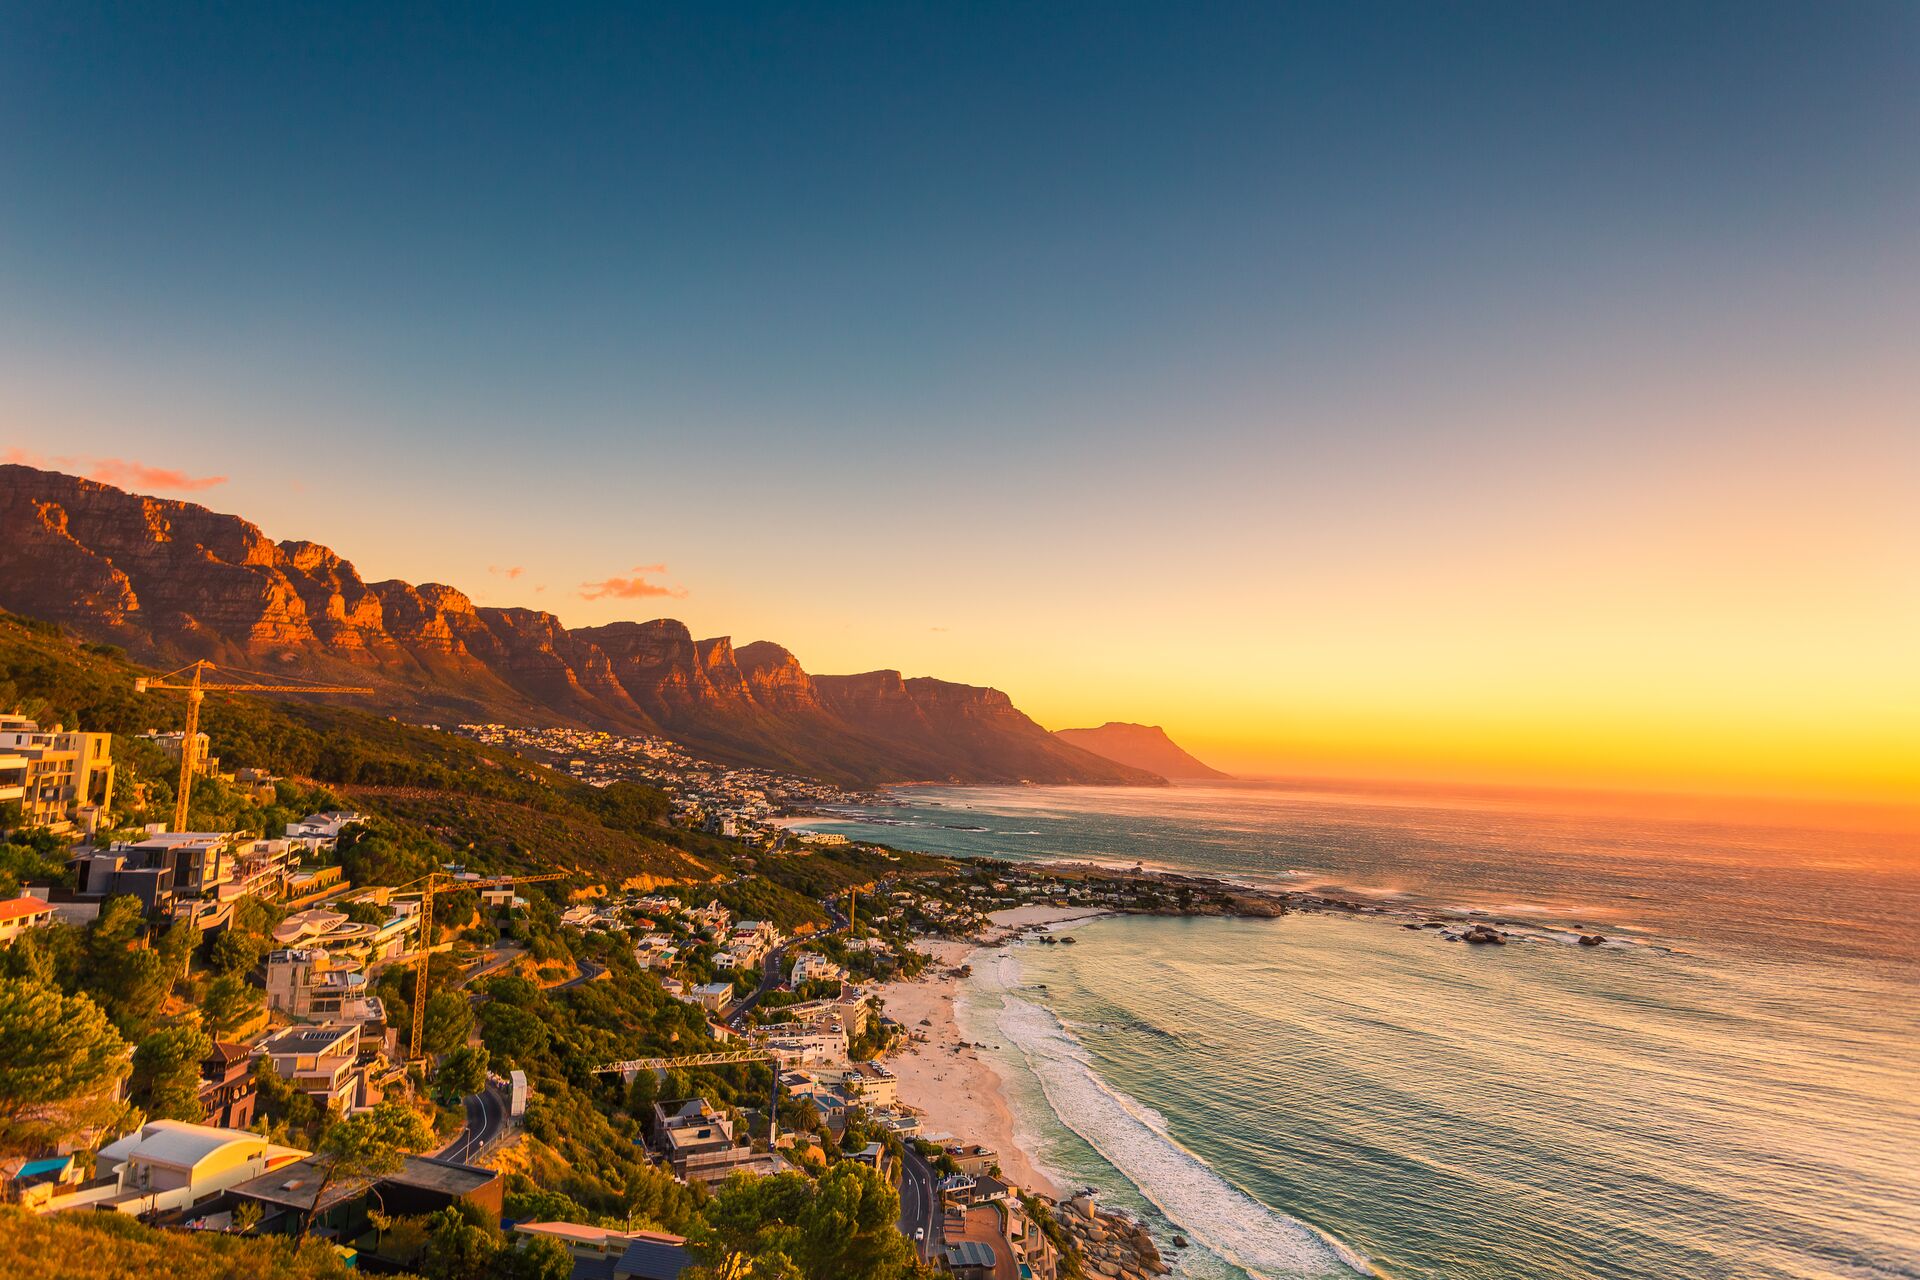 South Africa Tours & South Africa Travel Guide